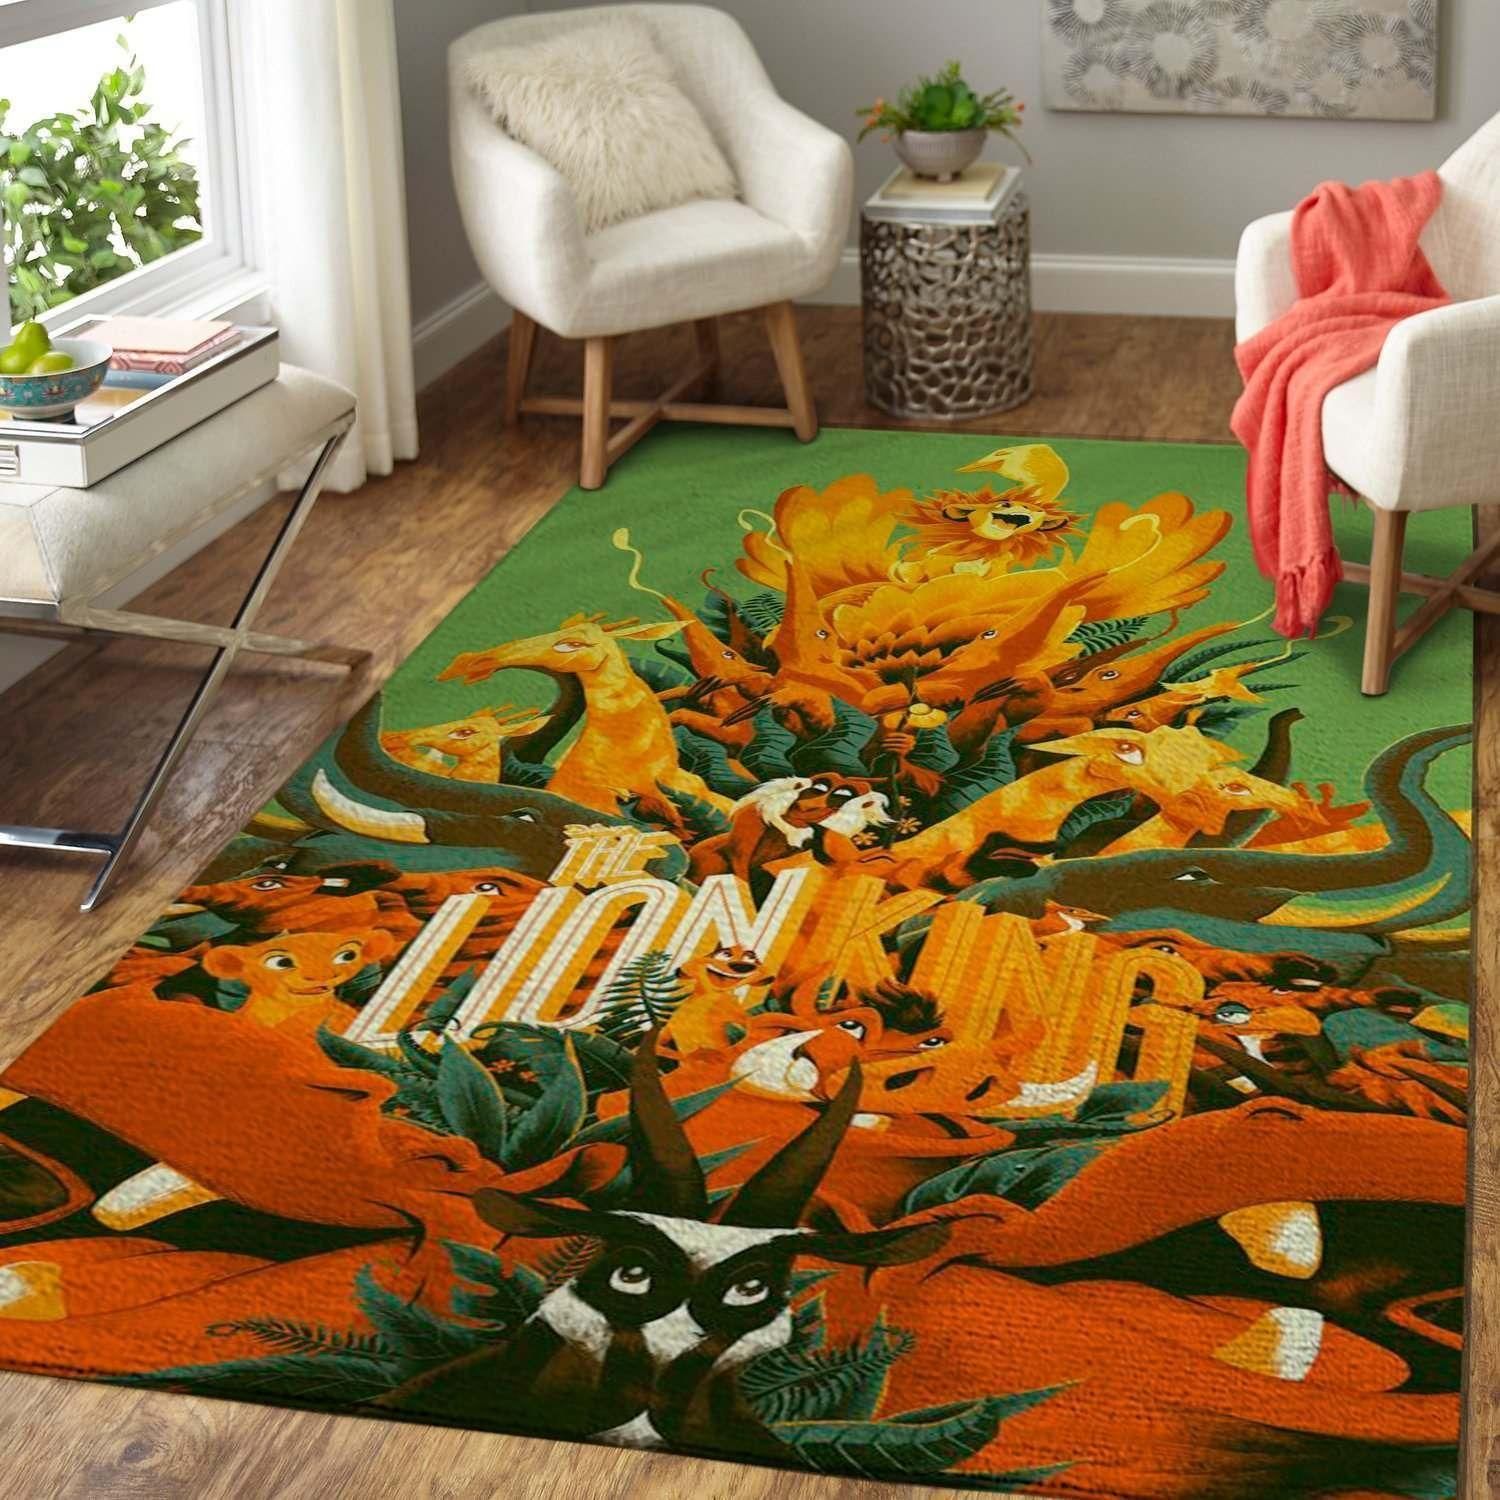 Disney Movie The Lion King Area Rug Chrismas Gift - Indoor Outdoor Rugs